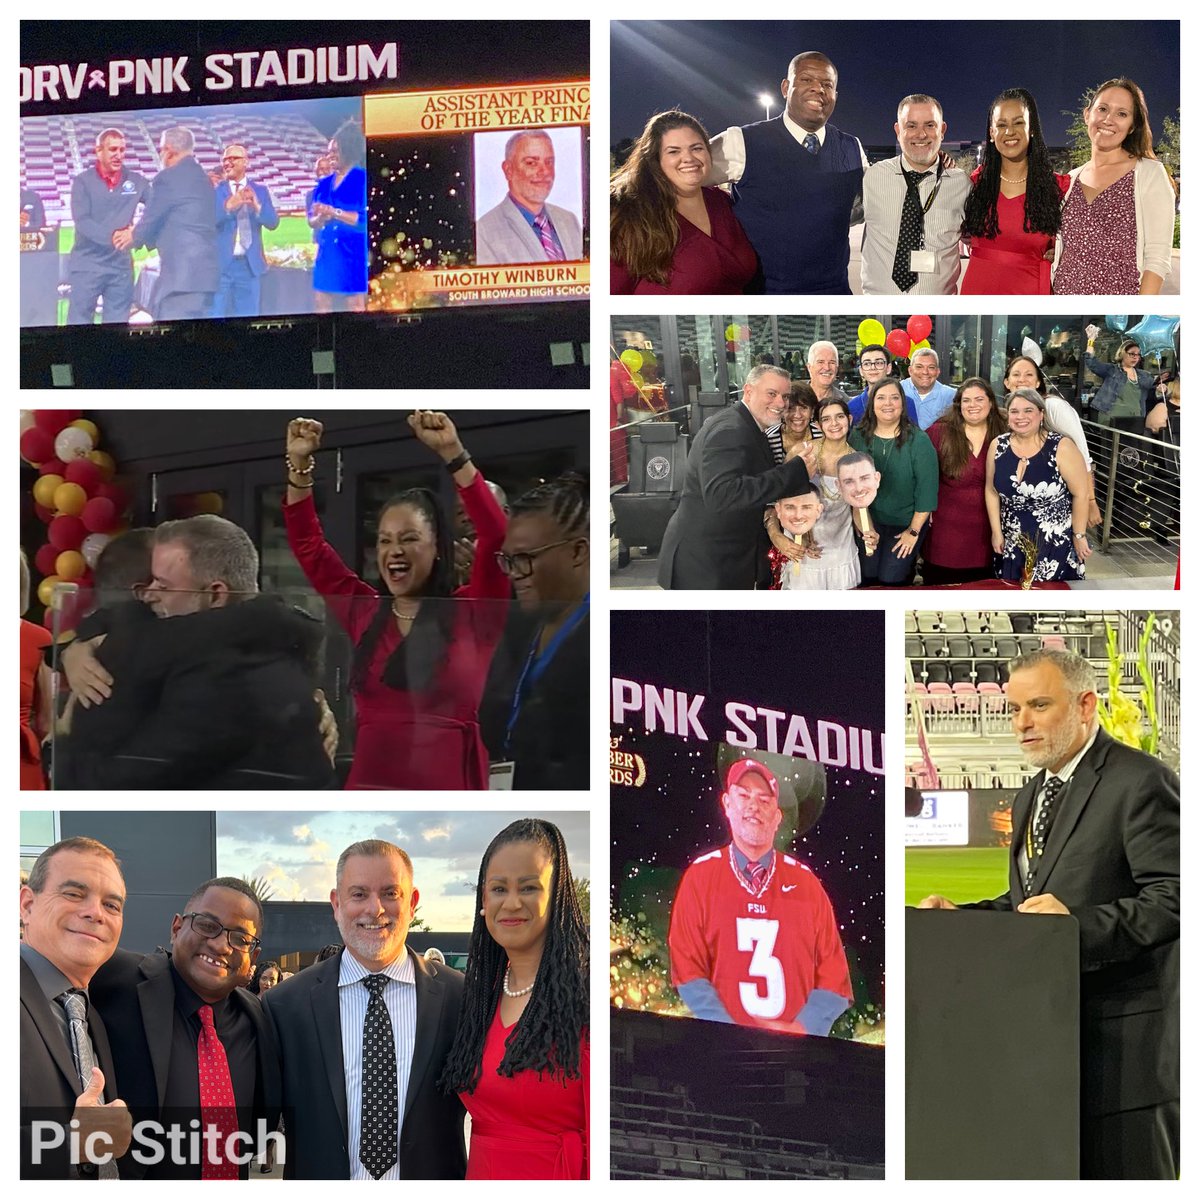 SBHS’s Mr. Tim Winburn is BCPS’s 2023 AP of the Year!! We are so proud of you Mr. Winburn & ALL the work you do for our Bulldogs! Otto & I were honored to share the stage with you. Thank you for making SBHS shine. Yes! We Can! We are…#SOUTHBROWARD!❤️💛 #bcpscaliber #BCPSCalis